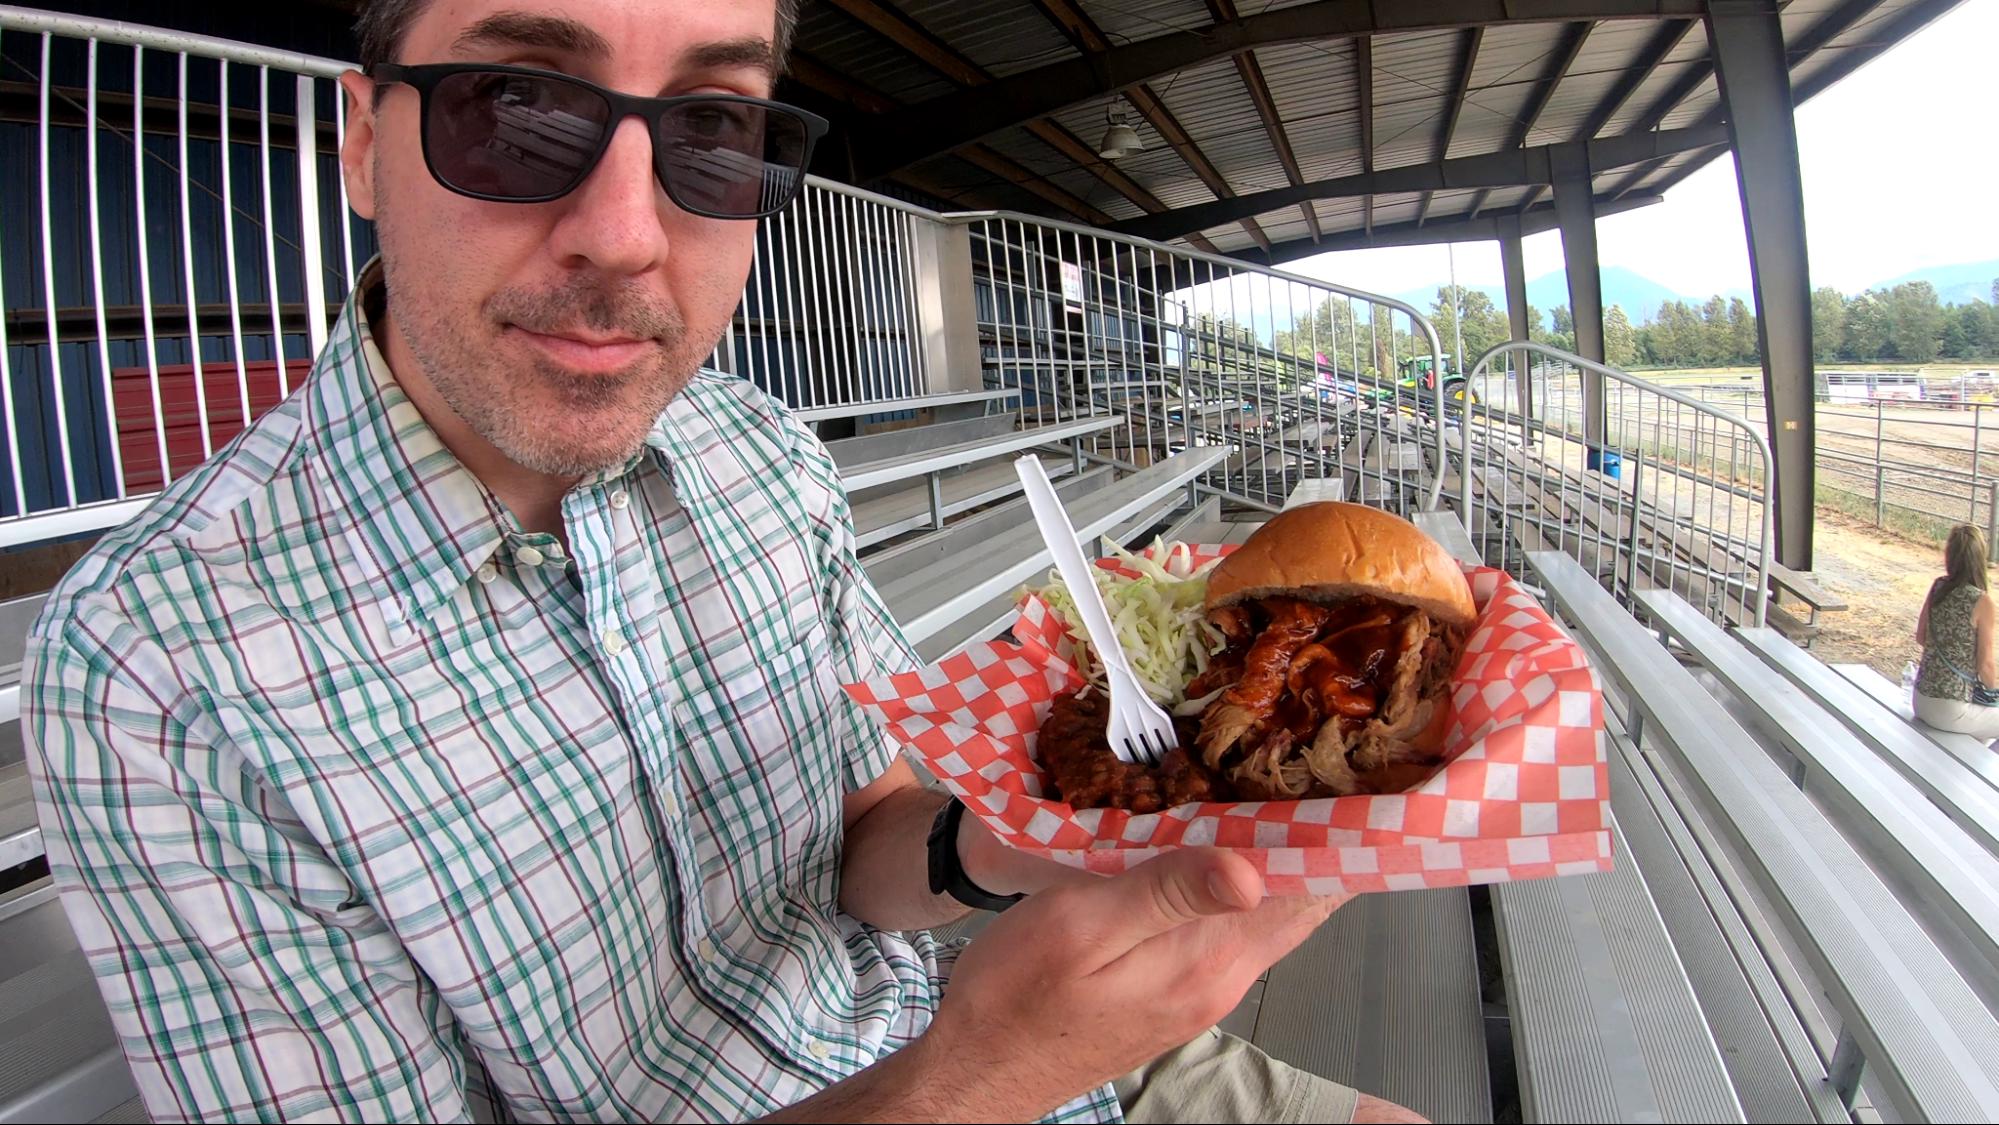 Jay gets ready to eat a delicious pulled pork sandwich at the Chilliwack Fair 2021